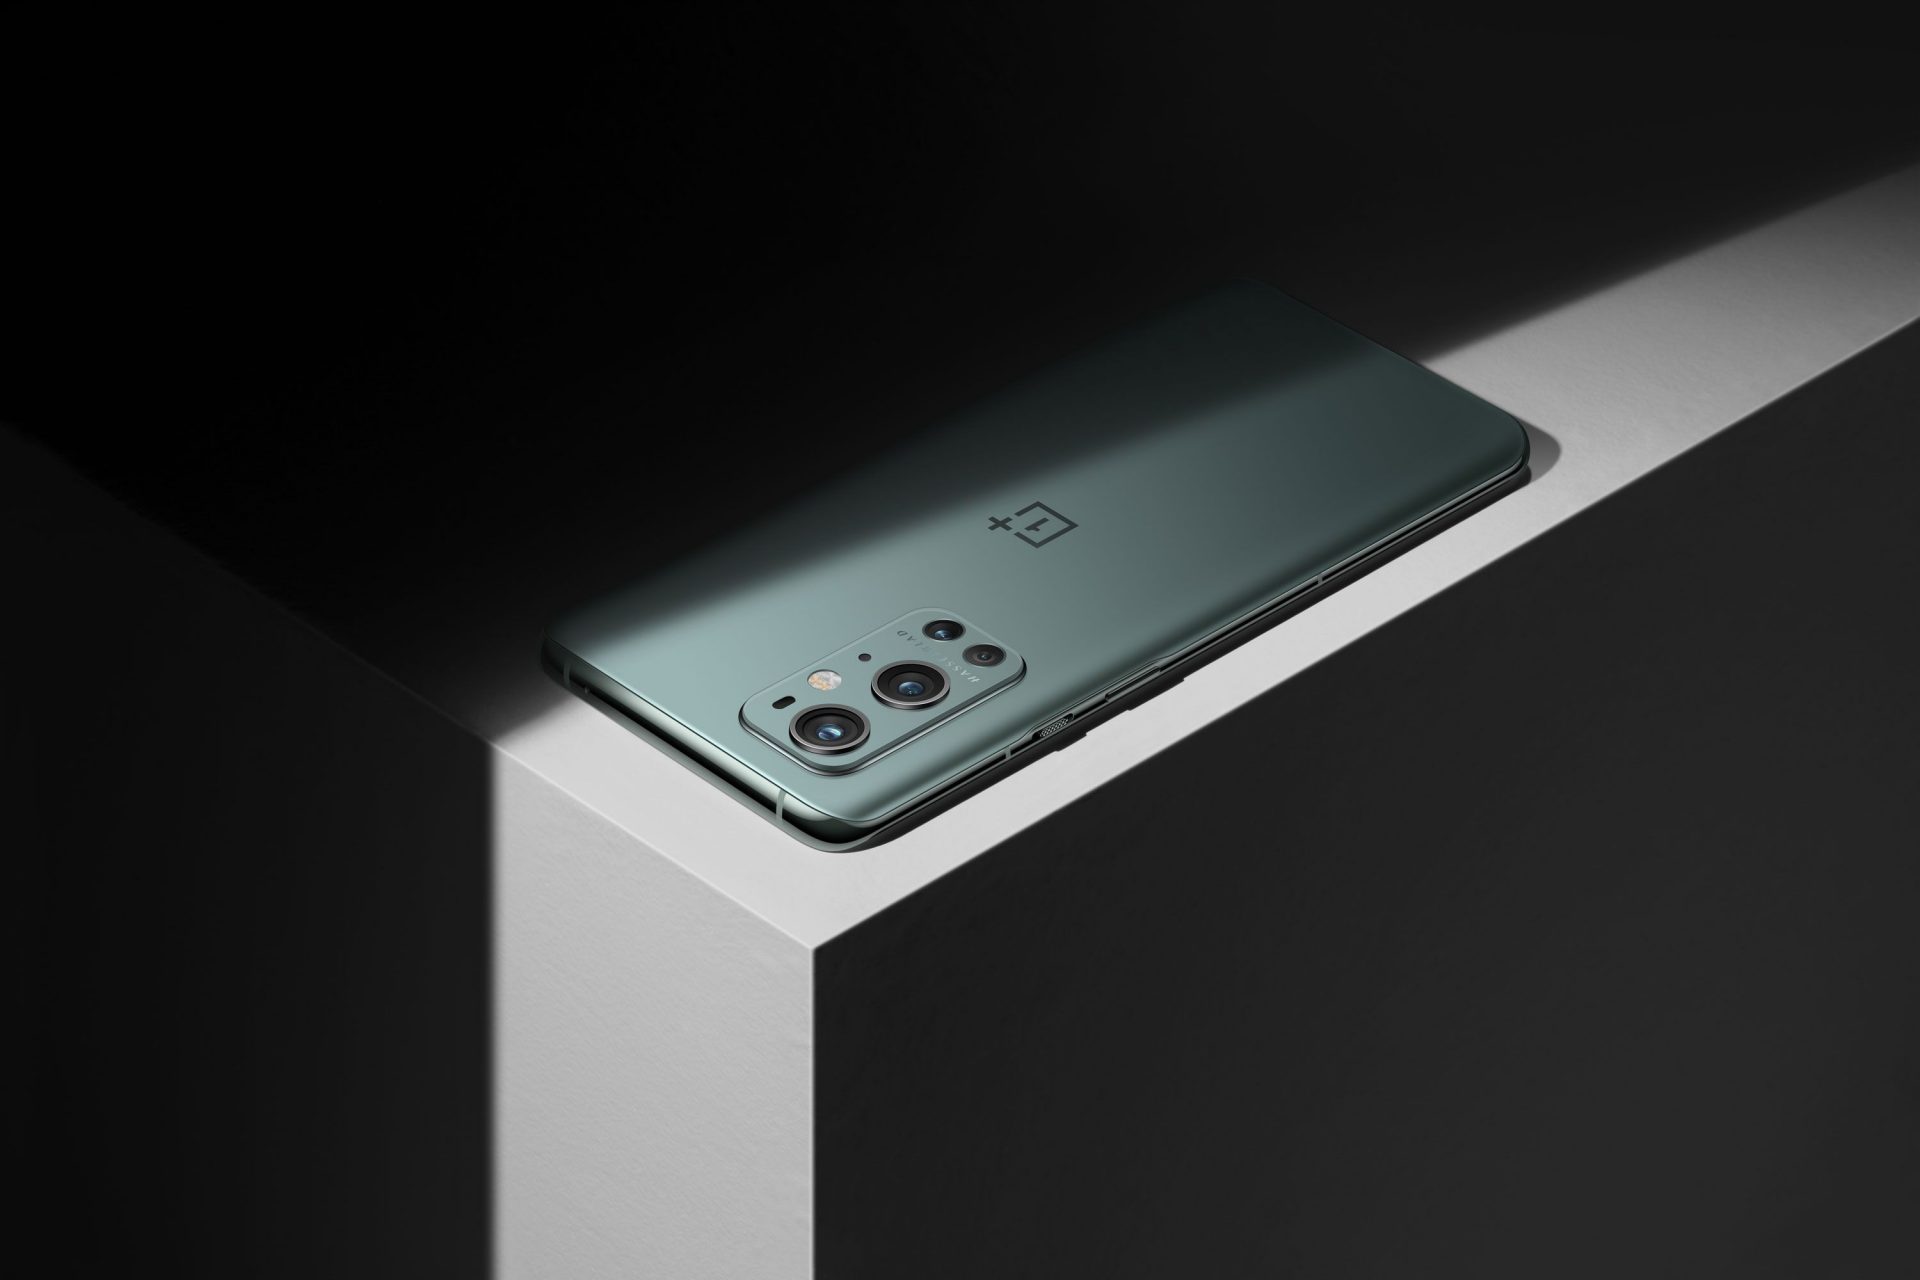 The OnePlus 9 and 9 Knowledgeable will feature Hasselblad cameras